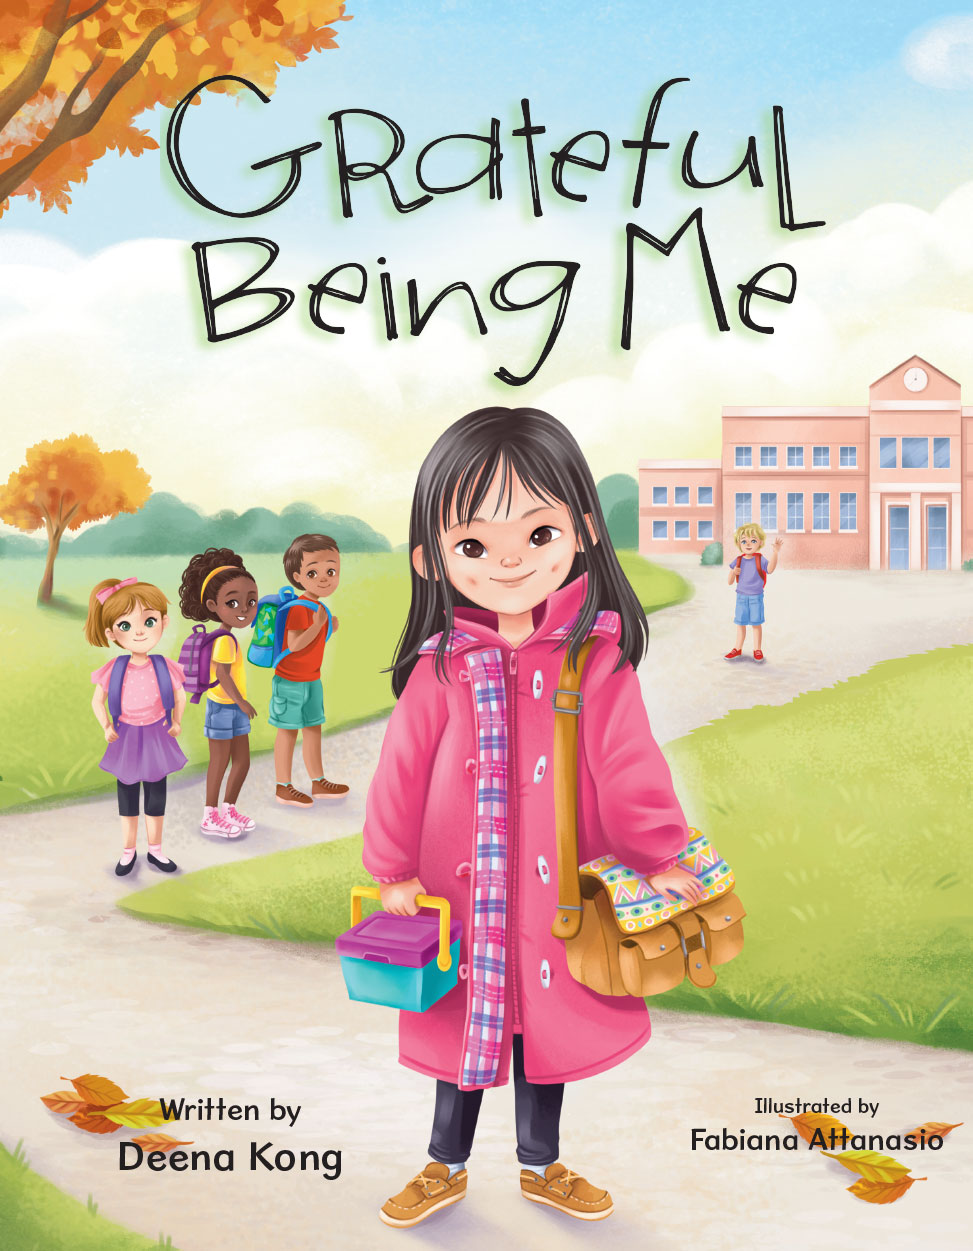 Grateful Being Me by Deena Kong Book Cover